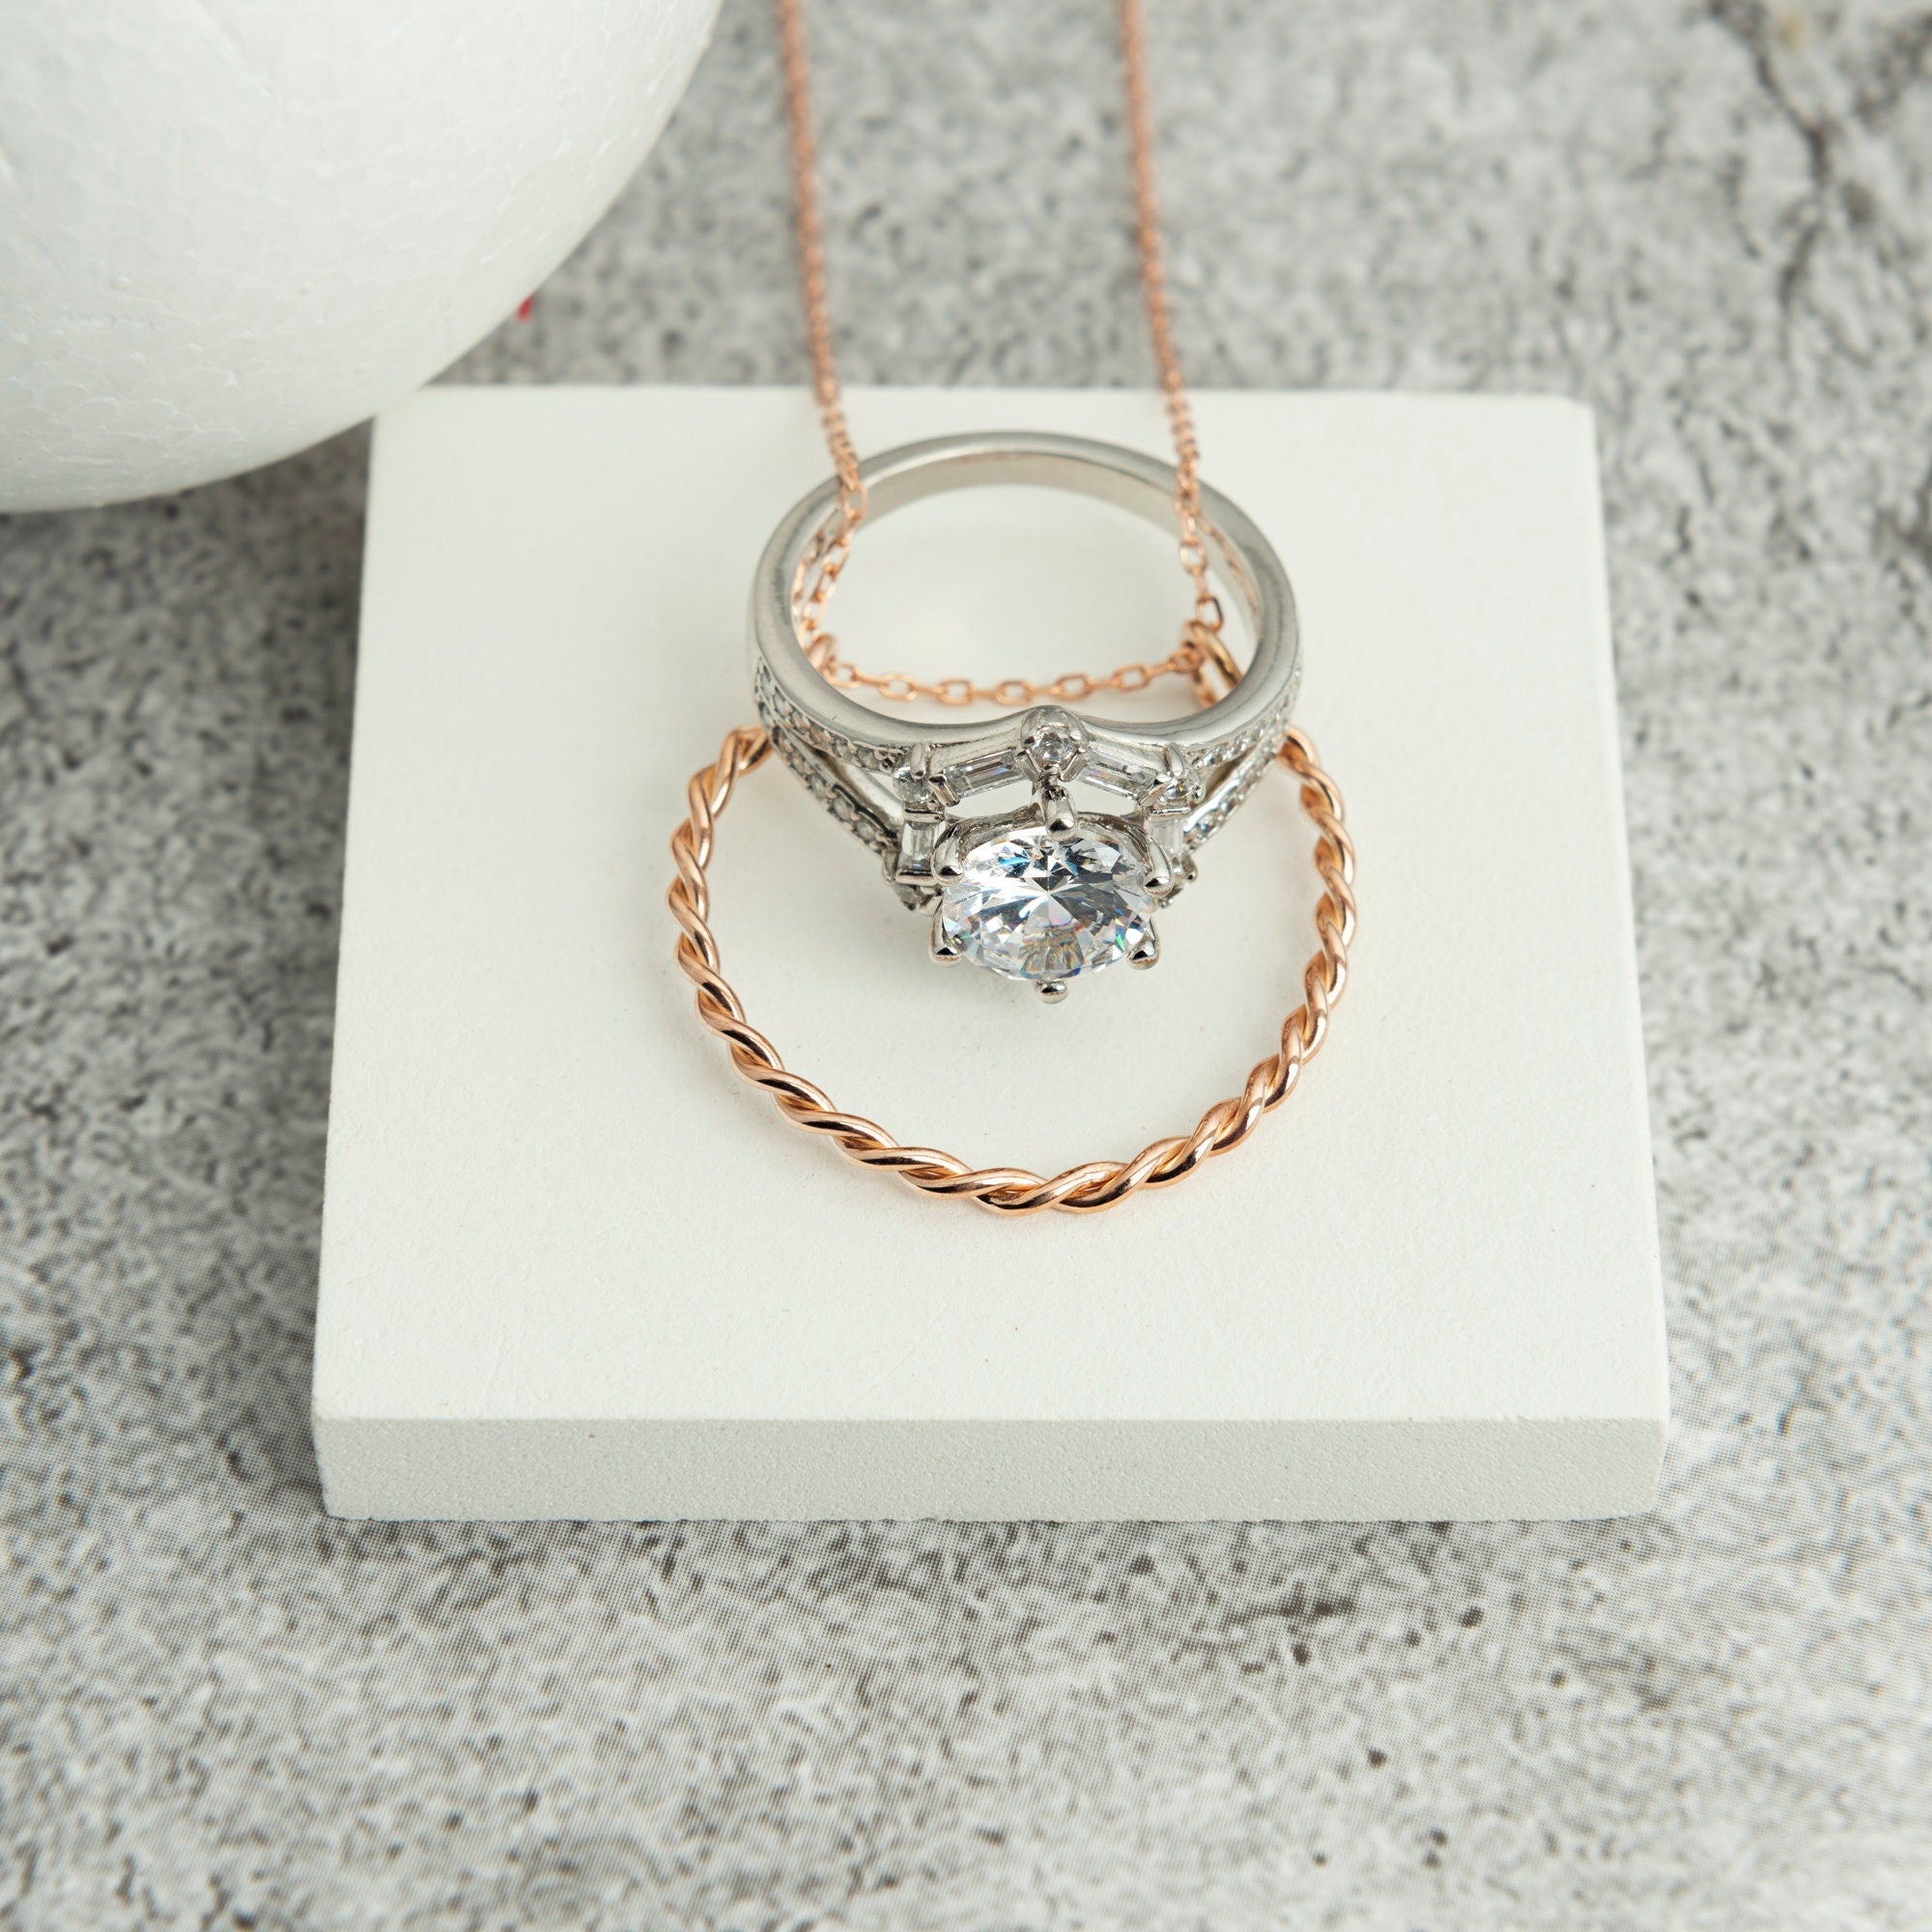 The Best Ring Holder Necklaces You Can Buy | Emmaline Bride